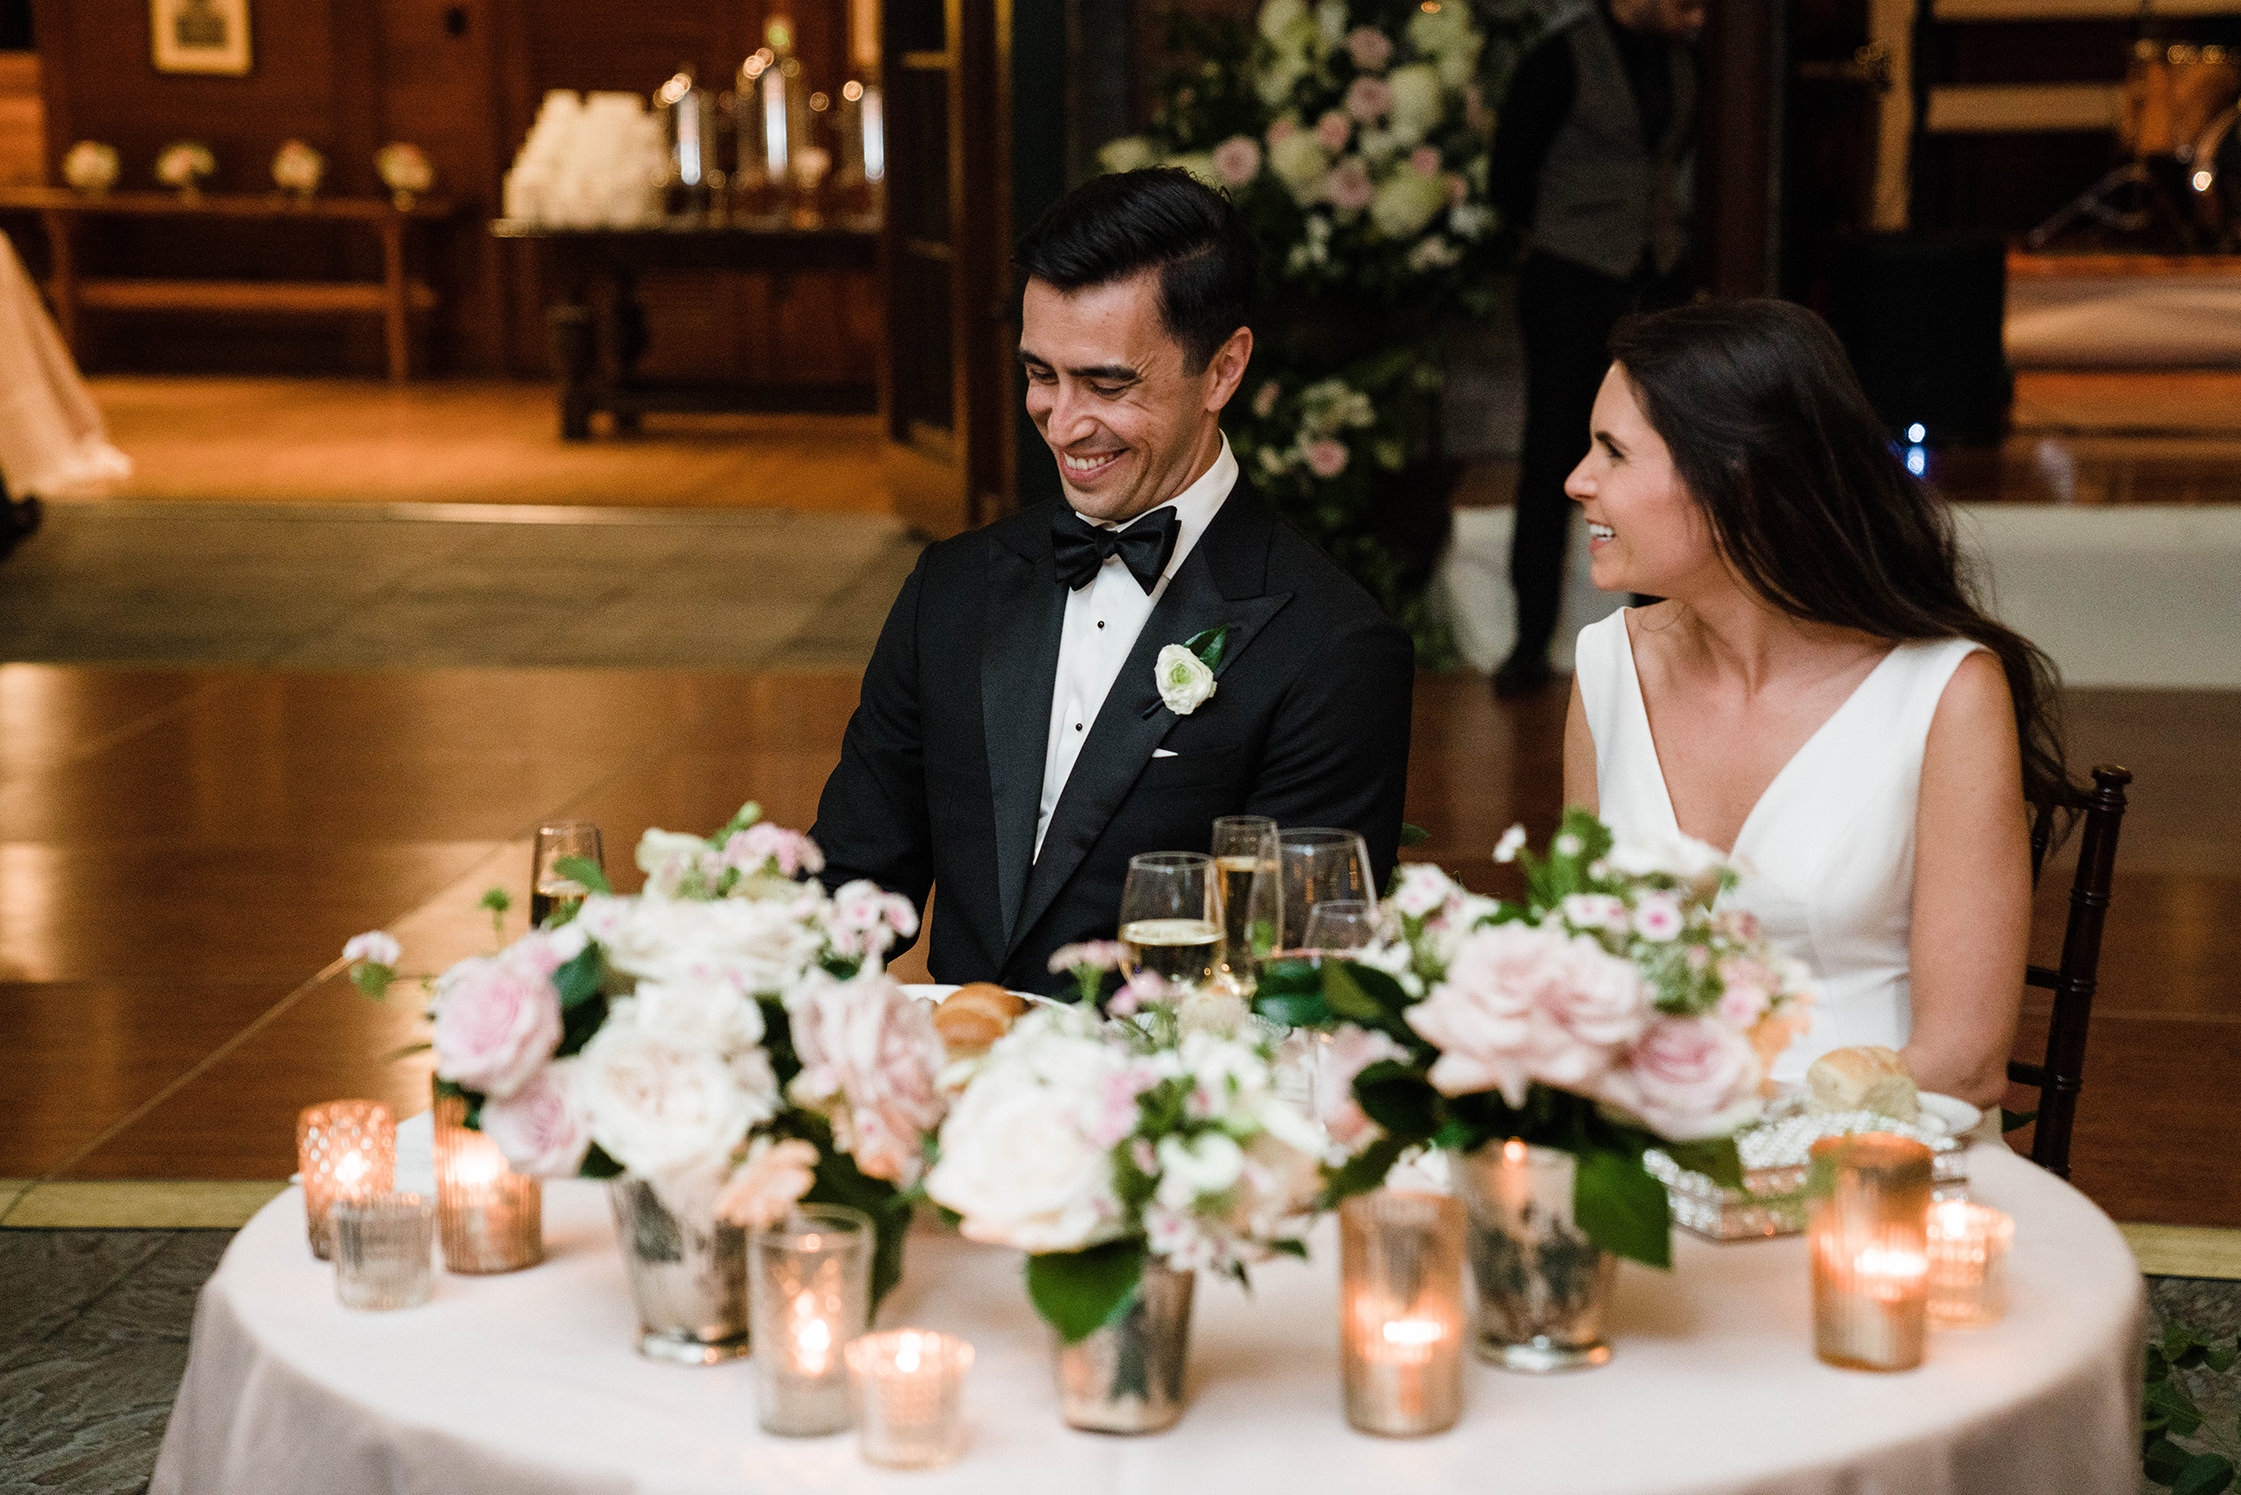 A documentary photograph featured in the best of wedding photography of 2019 showing a couple laughing during their wedding toasts